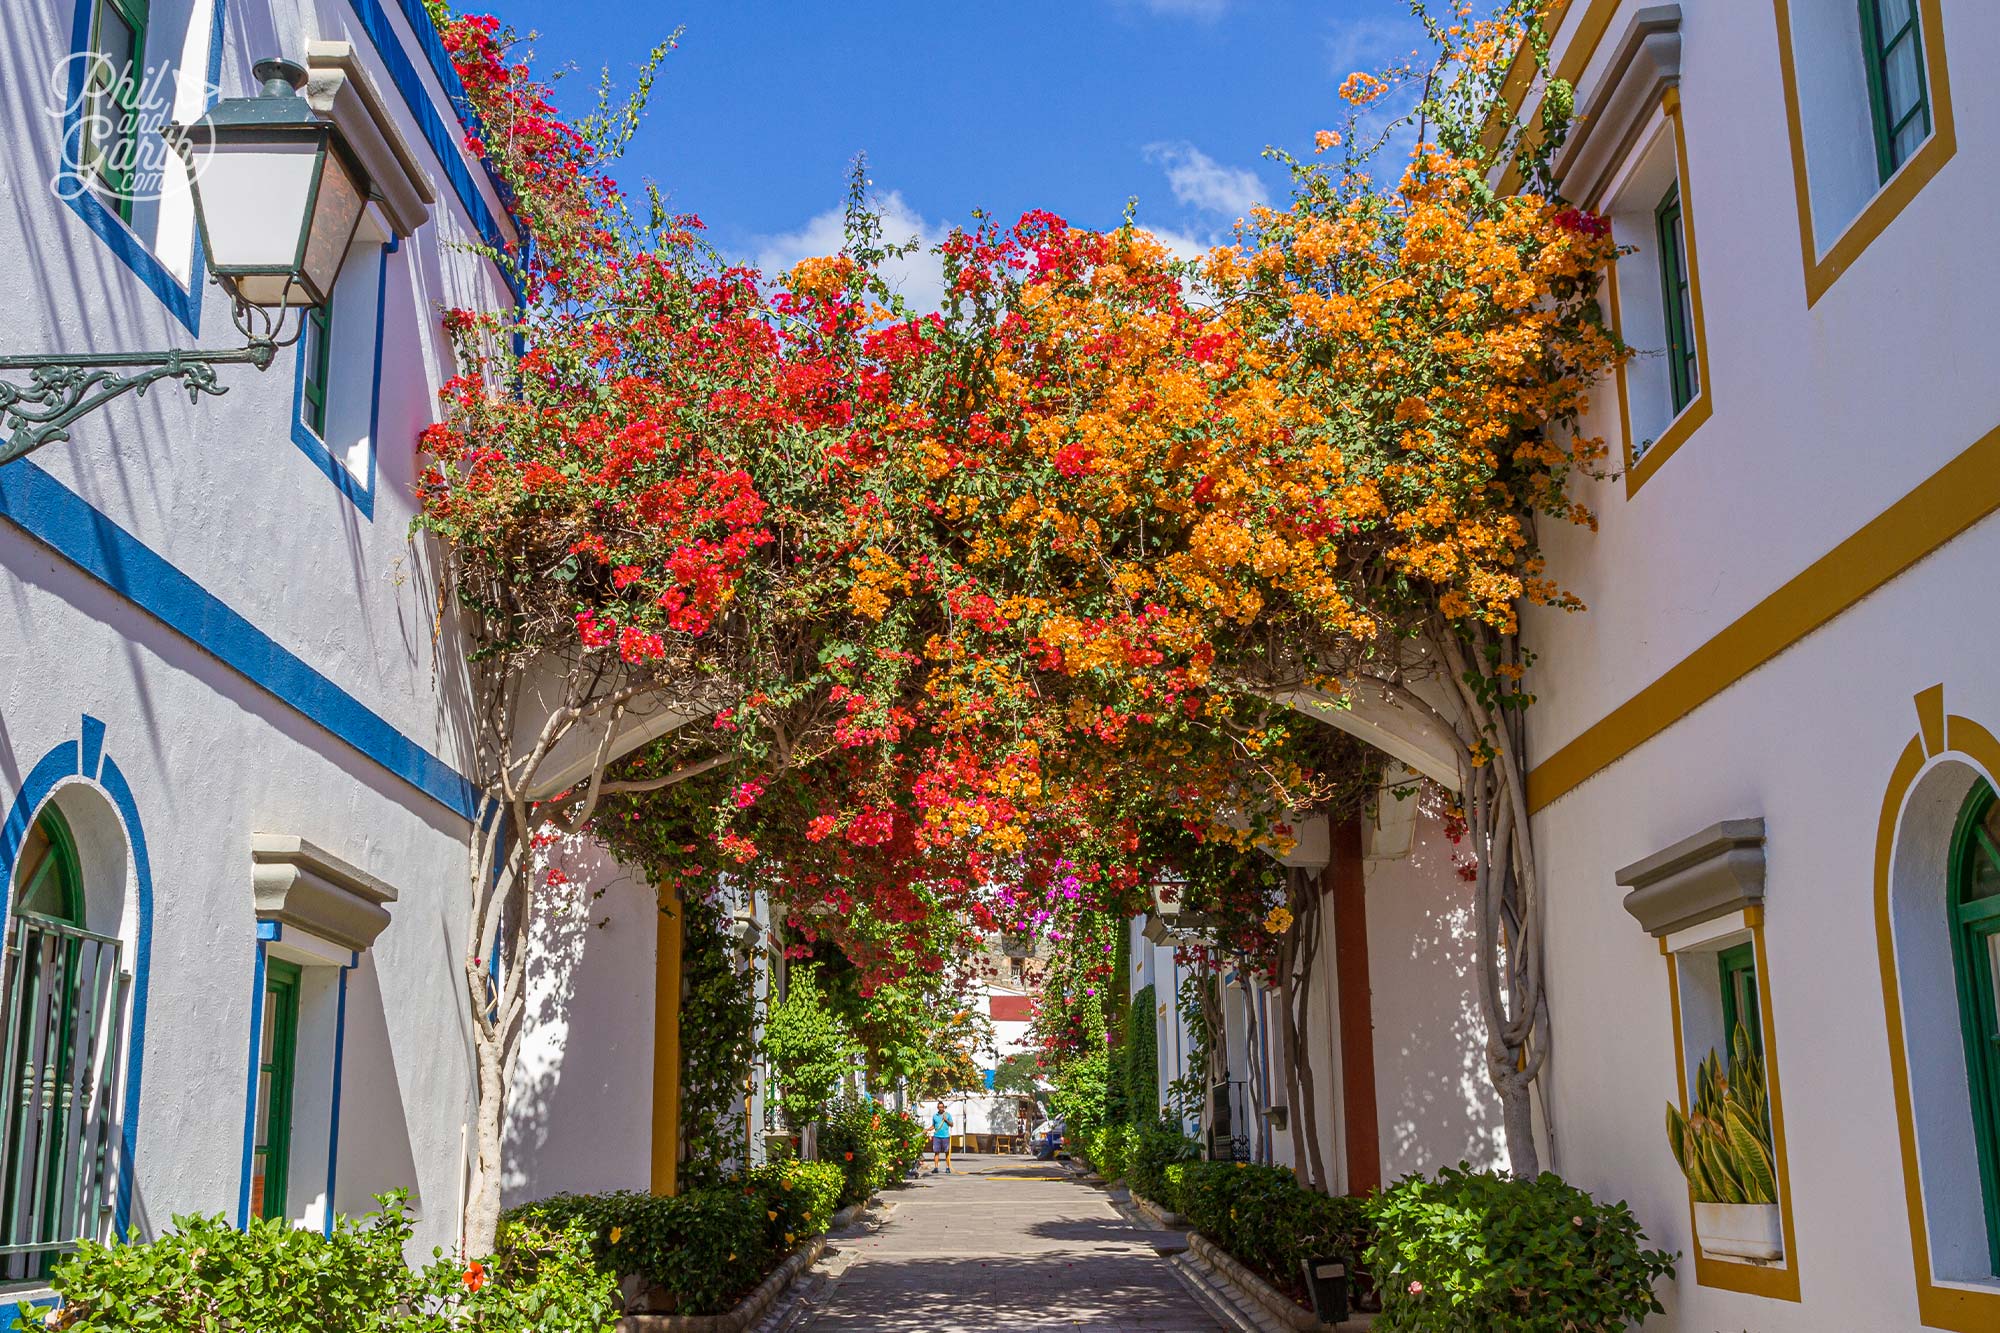 Gorgeous bougainvillea flowers create some welcome shady spots